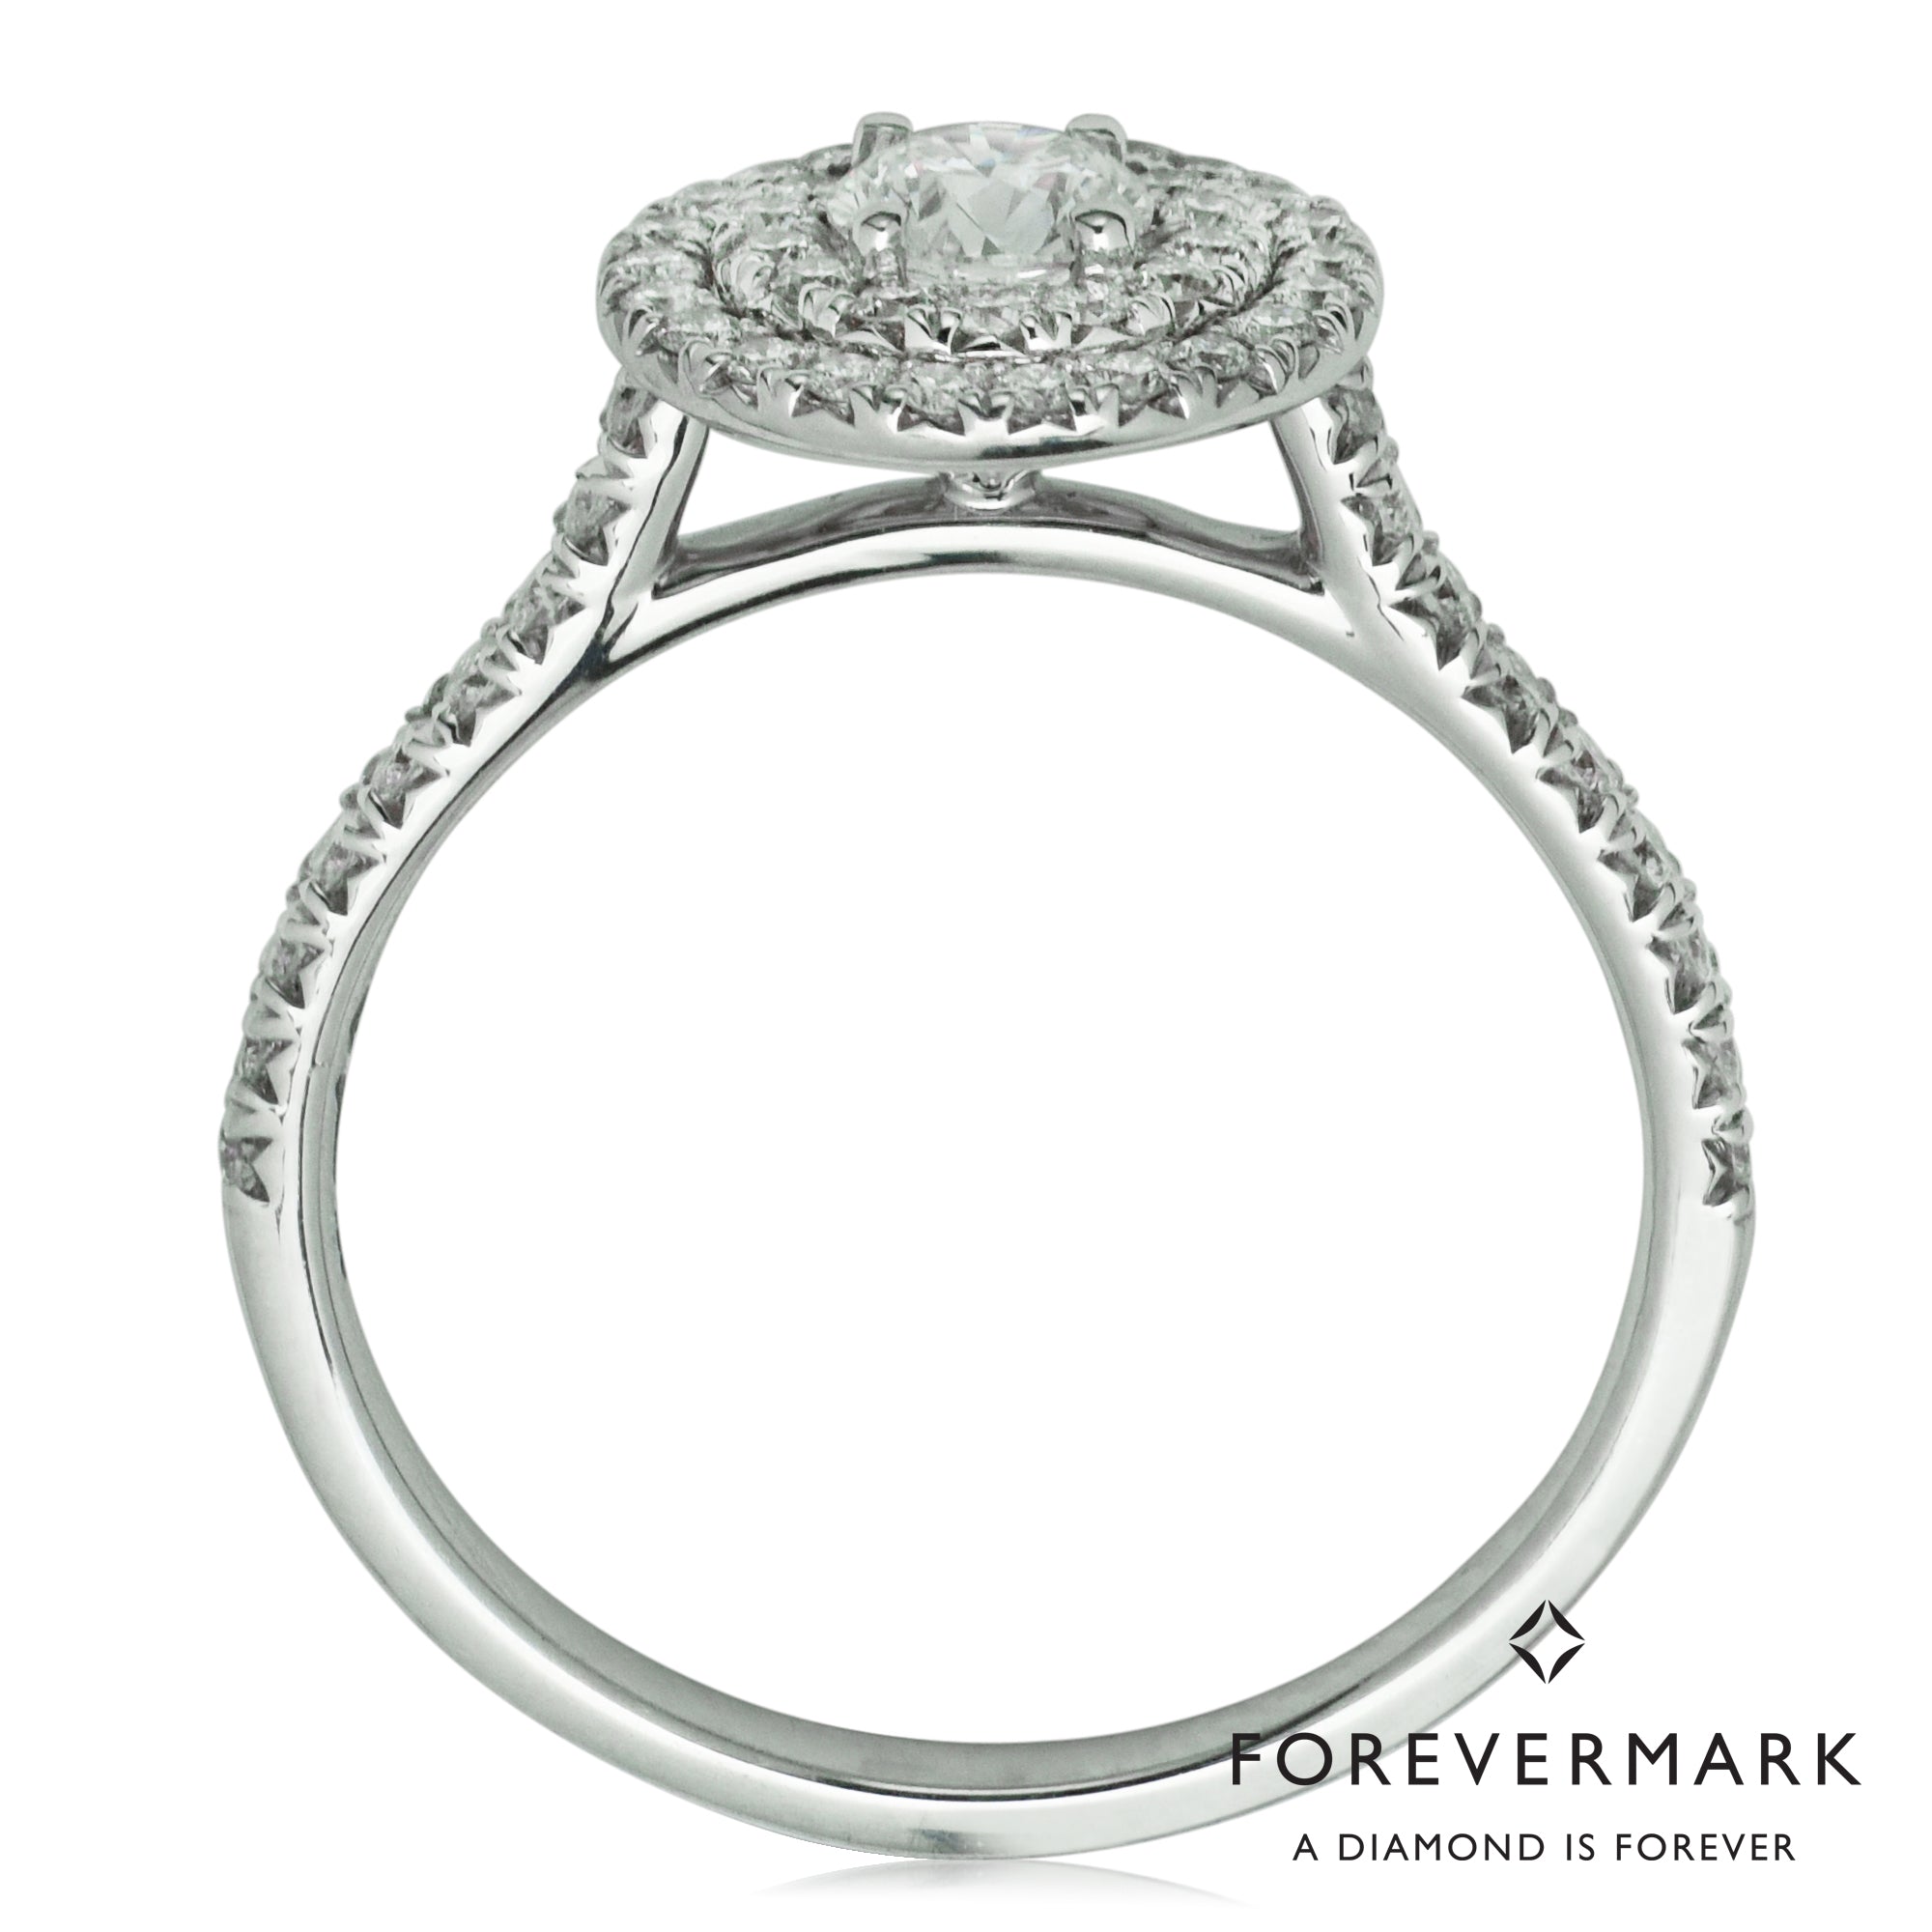 De Beers Forevermark Diamond Center of My Universe Double Halo Diamond Engagement Ring in 18kt White Gold (3/4ct tw)